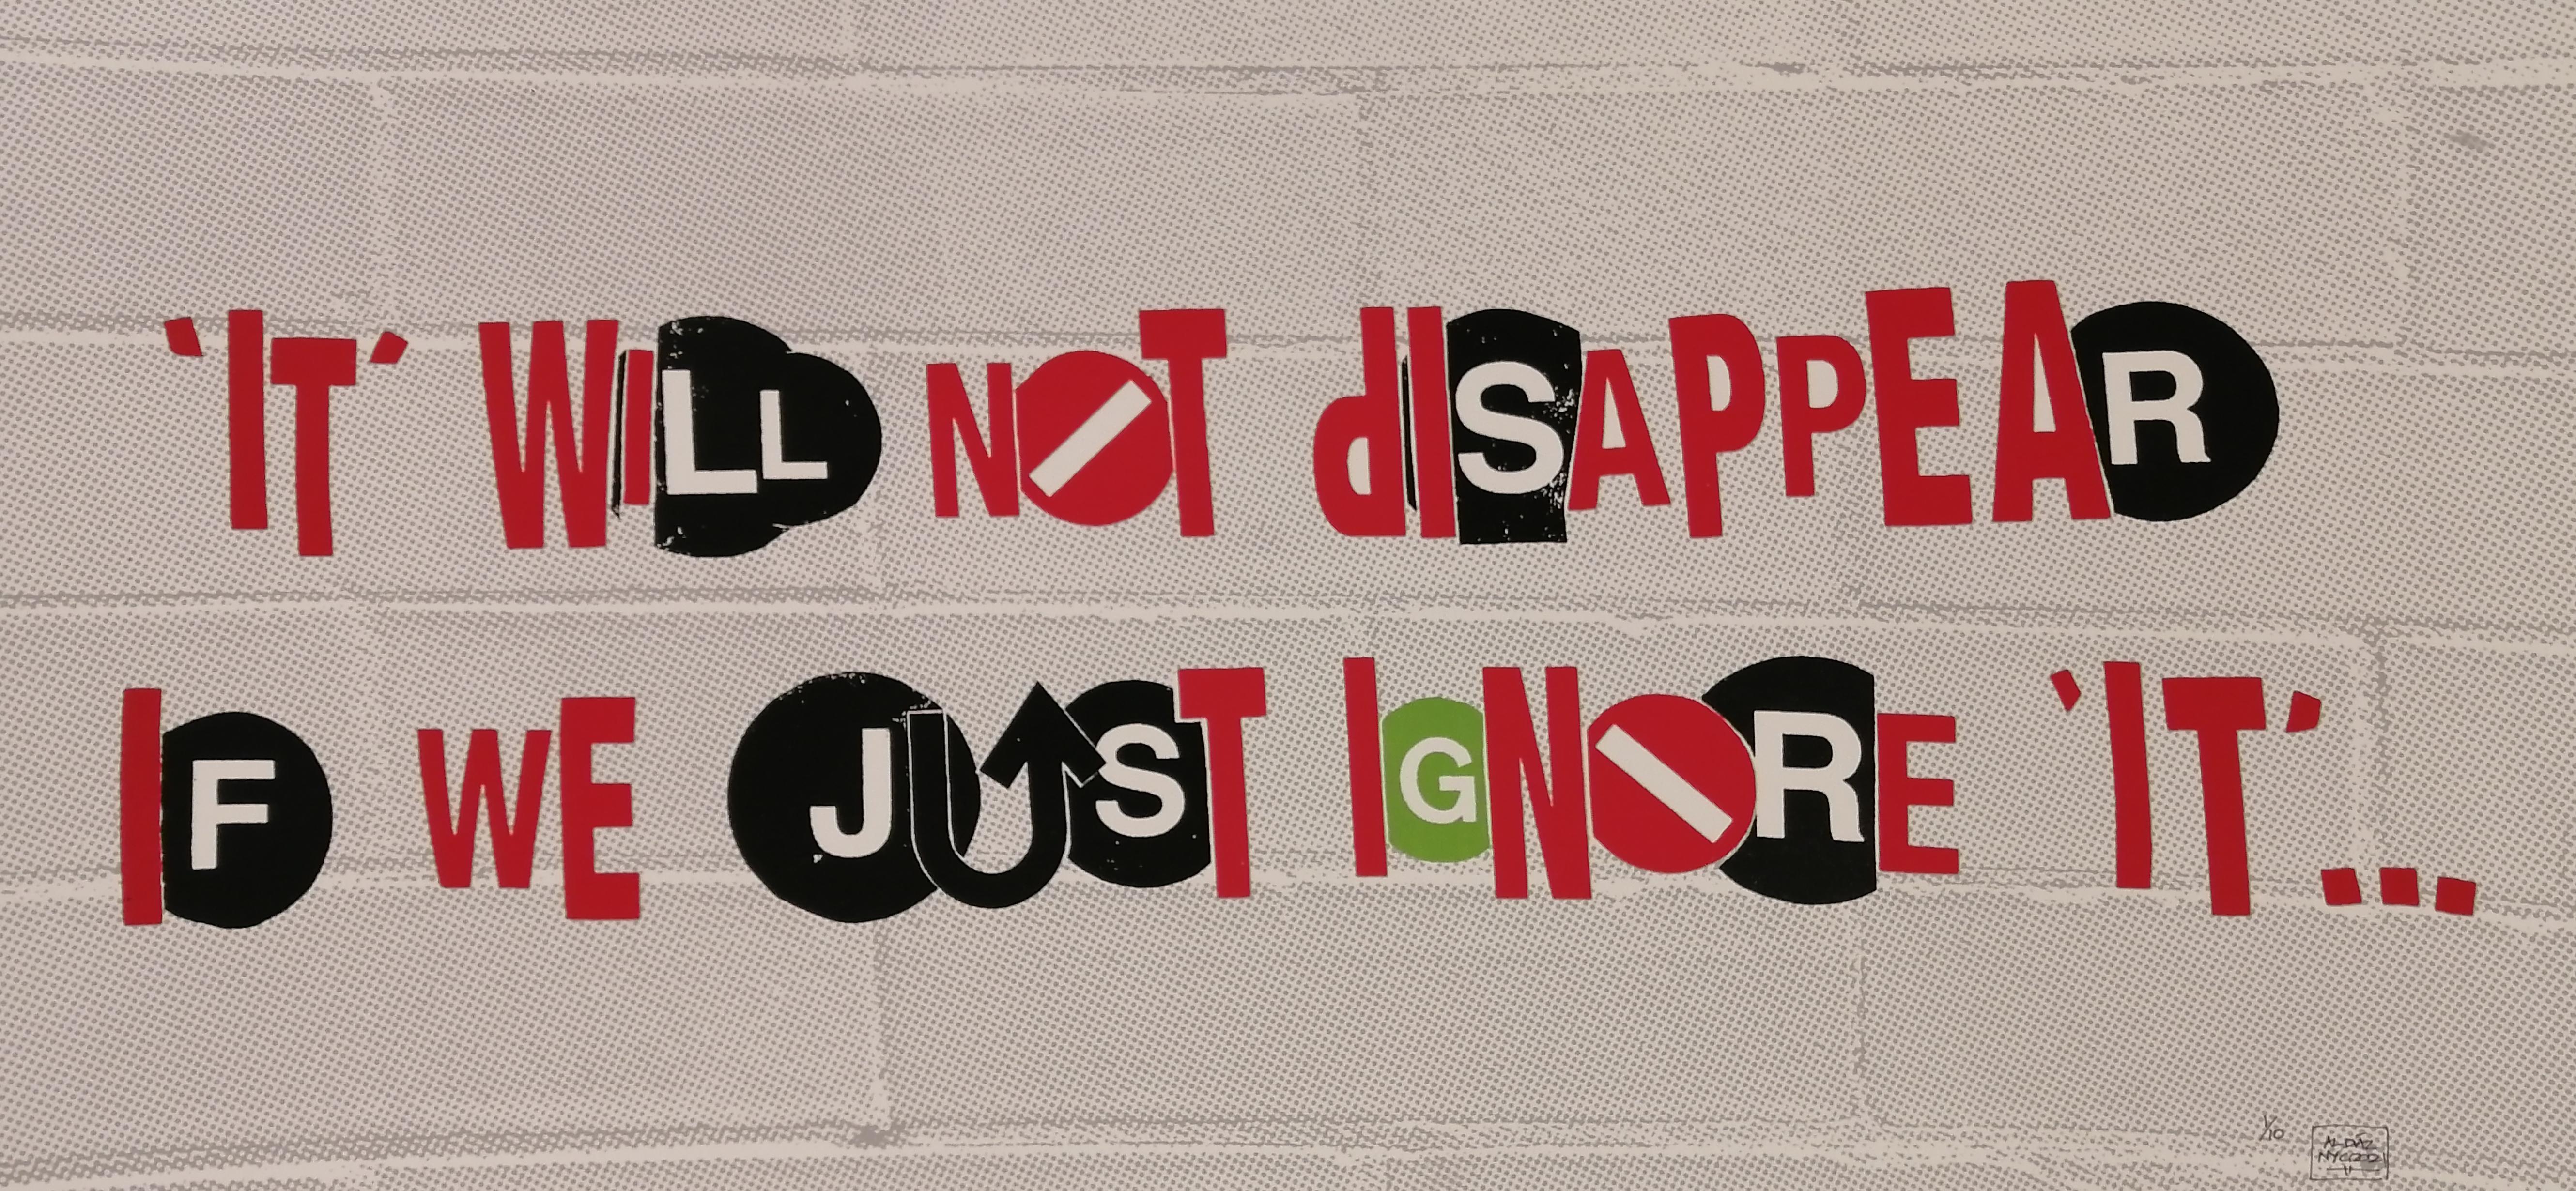 IT WILL NOT DISAPPEAR IF WE JUST IGNORE IT - Print by Al Diaz